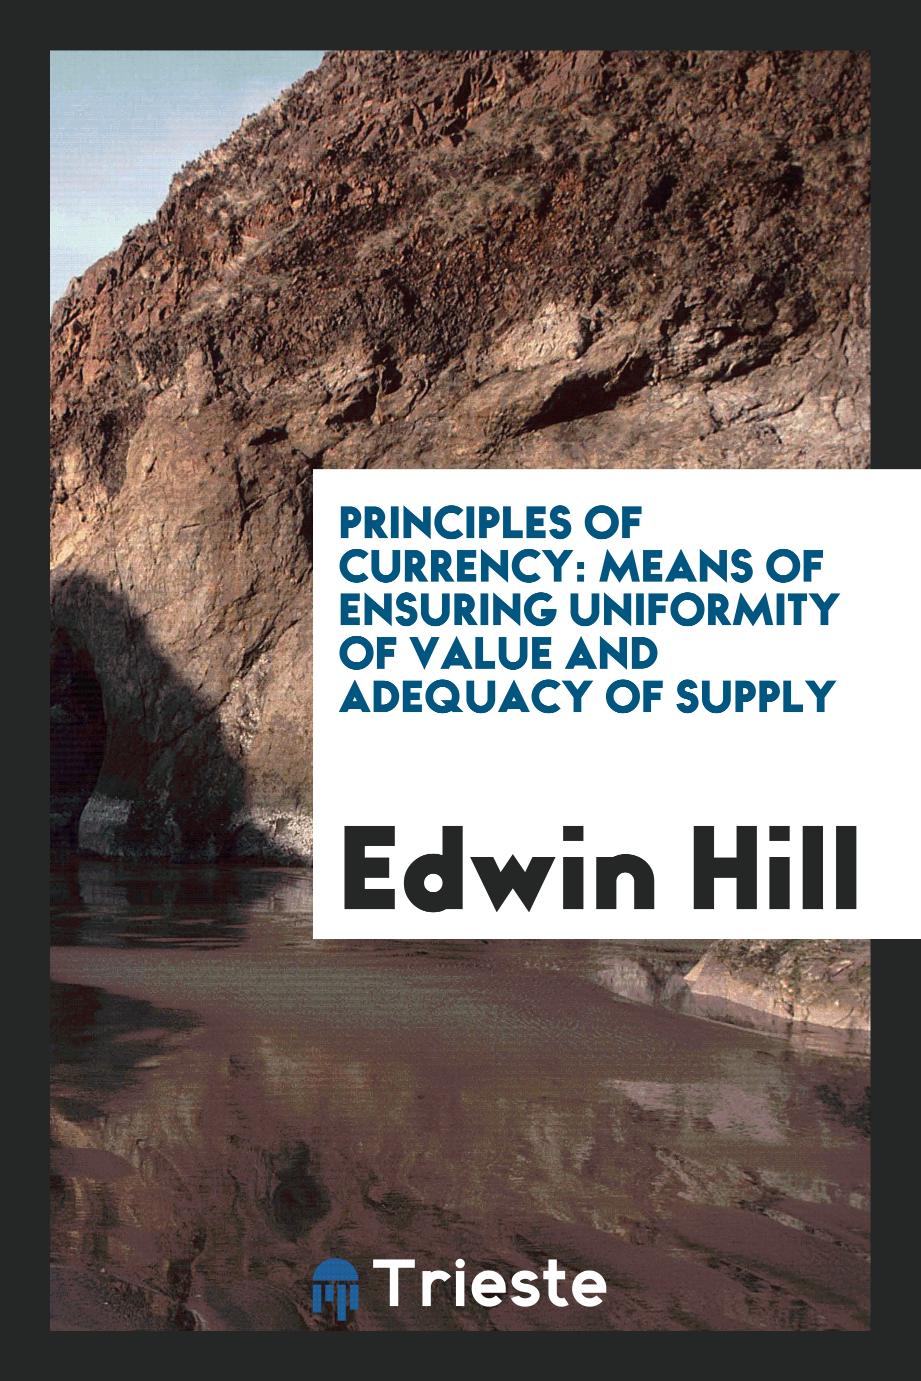 Principles of currency: means of ensuring uniformity of value and adequacy of supply